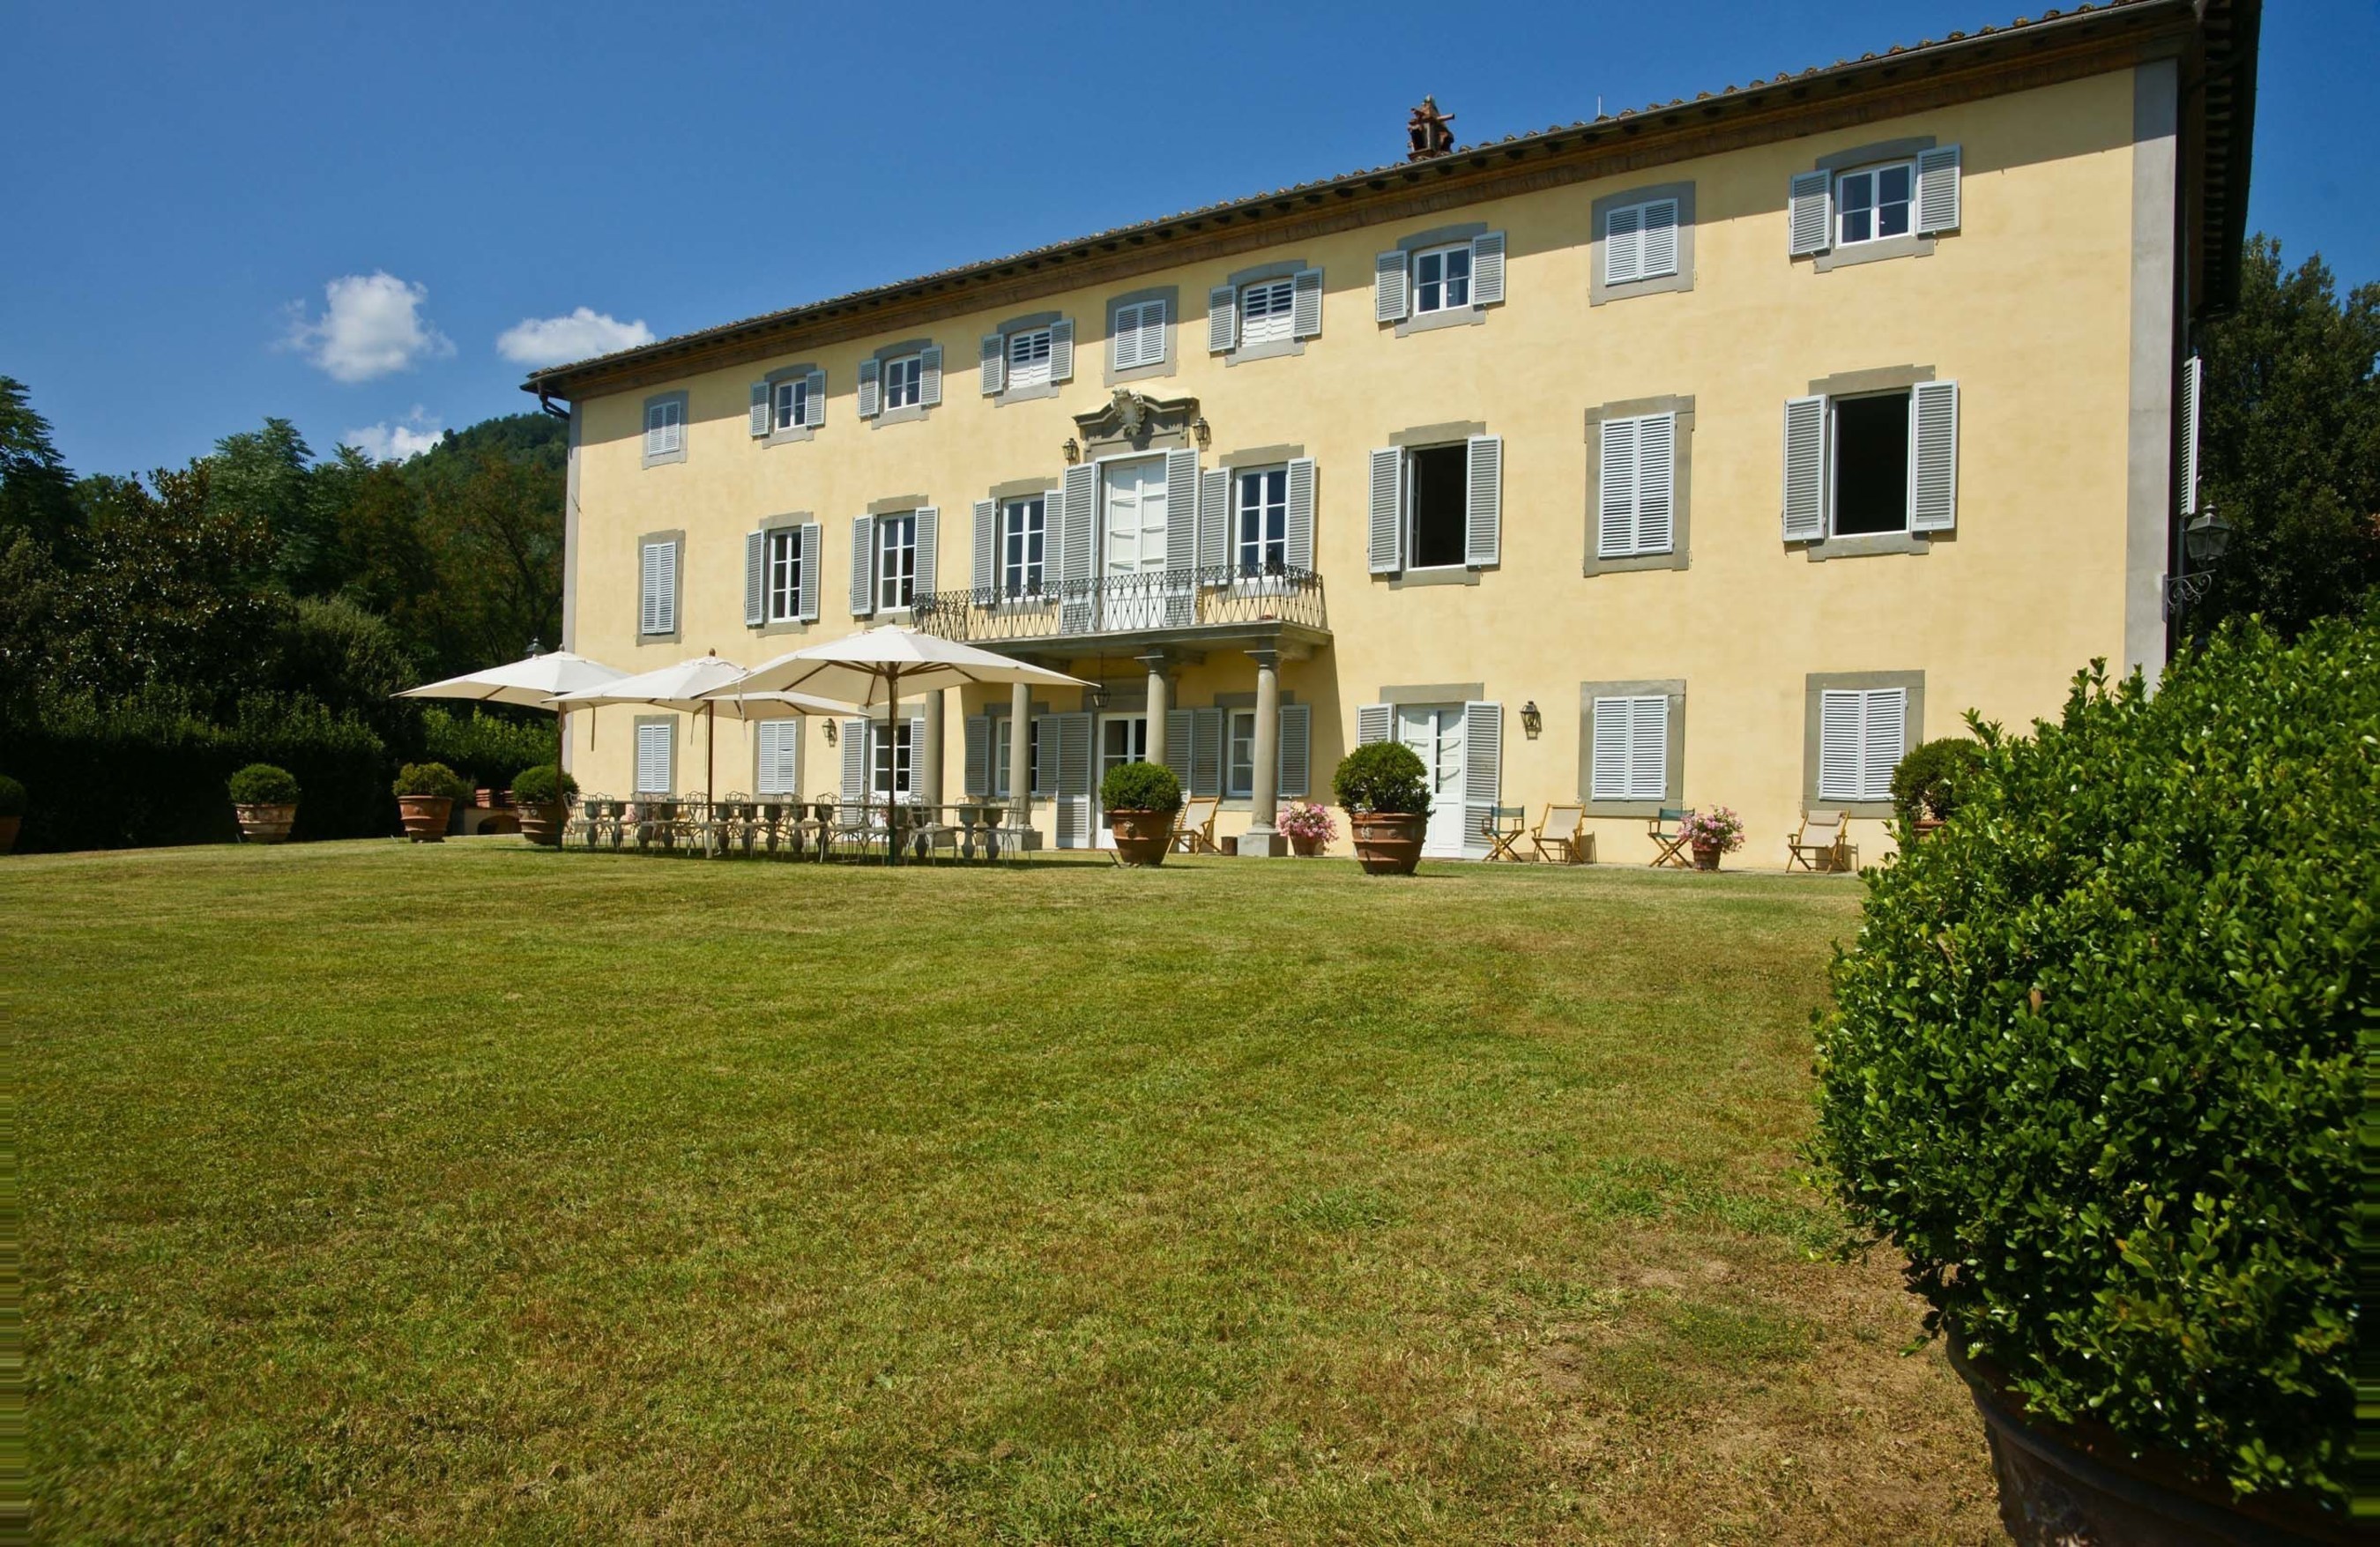 Carla hosts guests at this 18th Century Villa located just outside the rolling hills of Lucca, Italy.